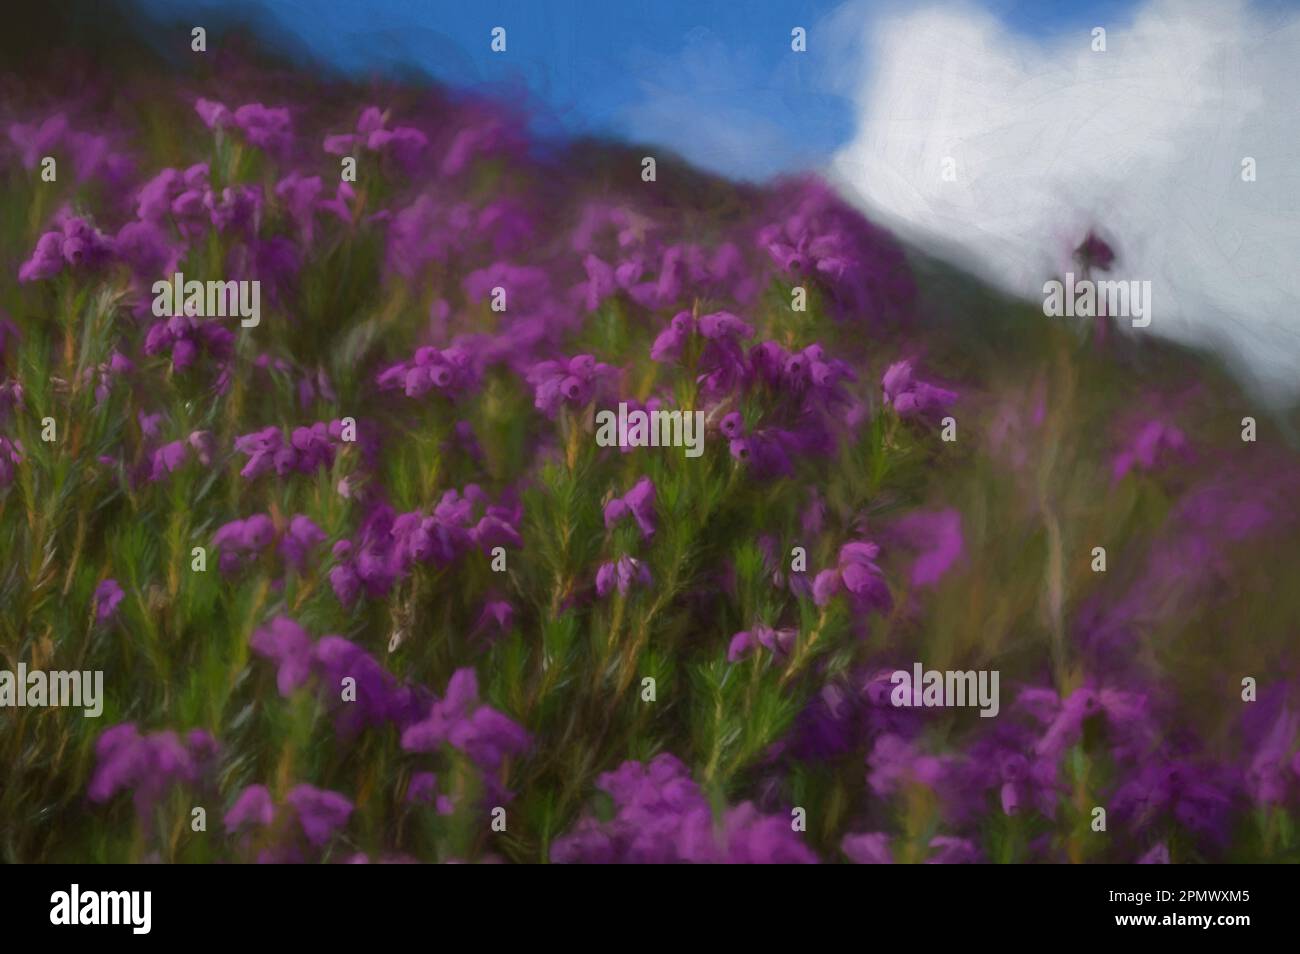 Digital painting of beautiful purple Bell Heather in full bloom against a blurred mountain background. Stock Photo